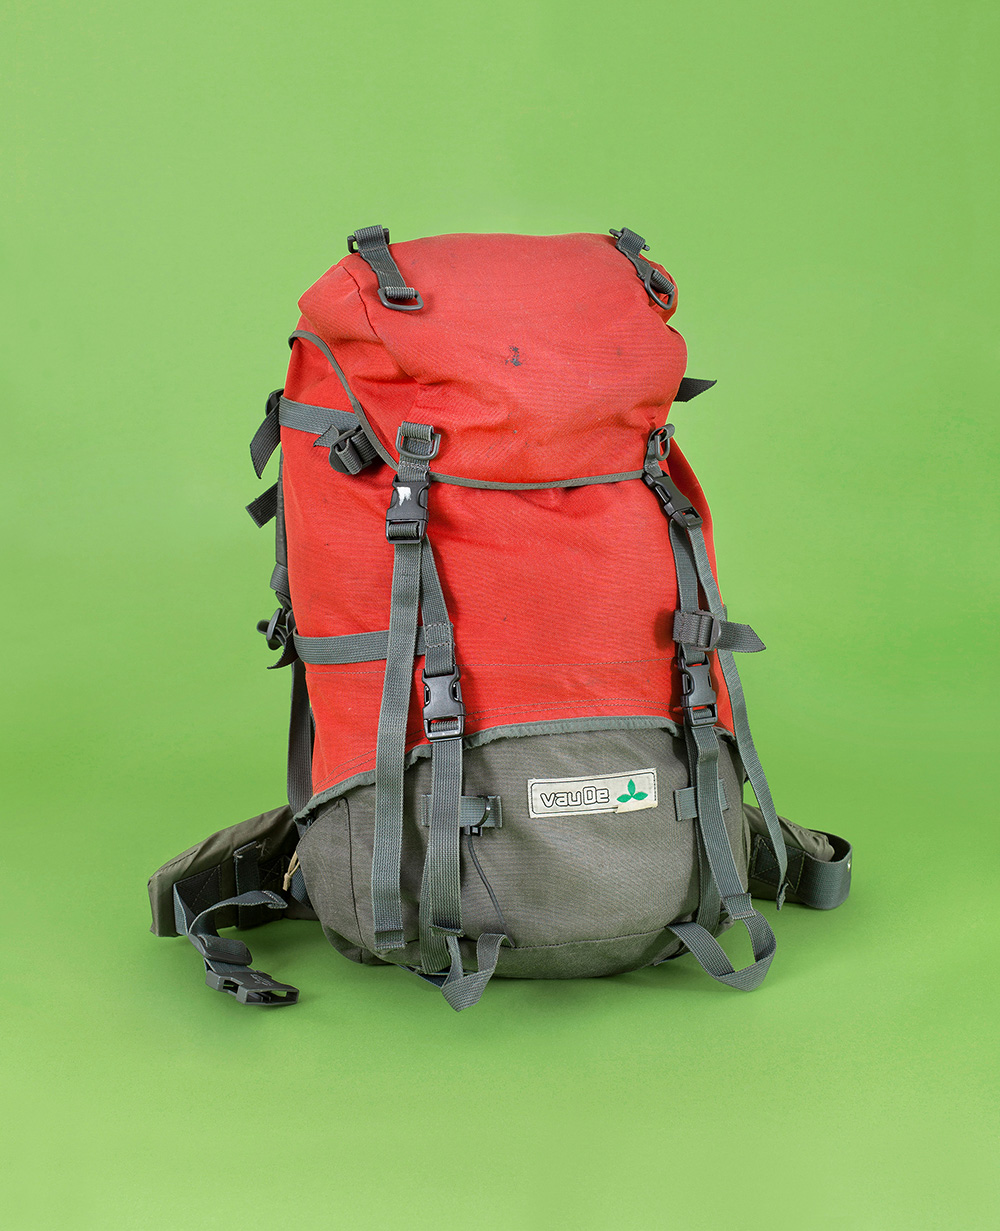 VauDe hiking backpack. Red-grey, worn. On a green background.